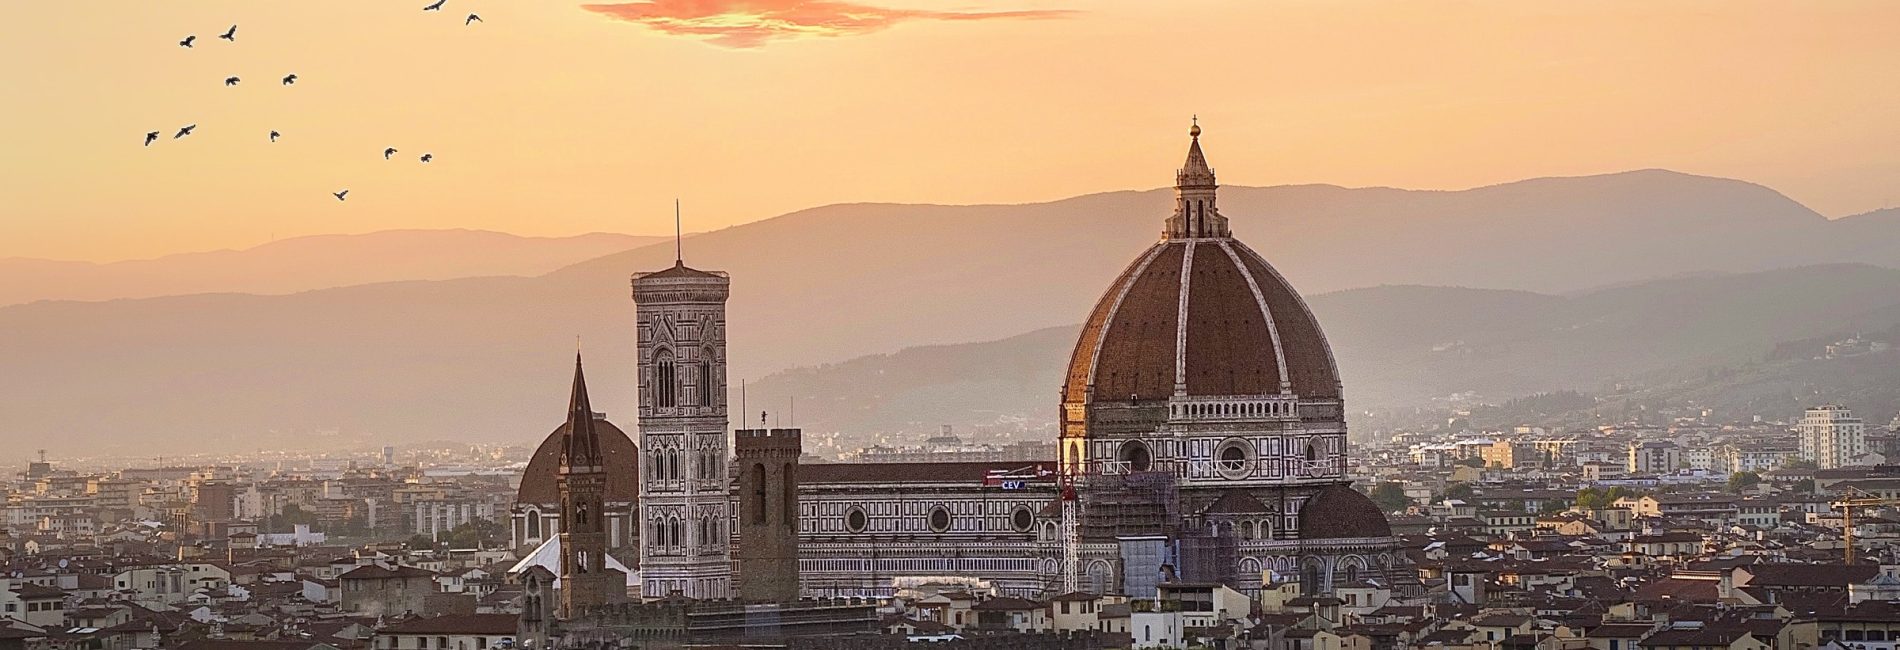 From the Renaissance to contemporary art, here is why you should visit Firenze in 2022